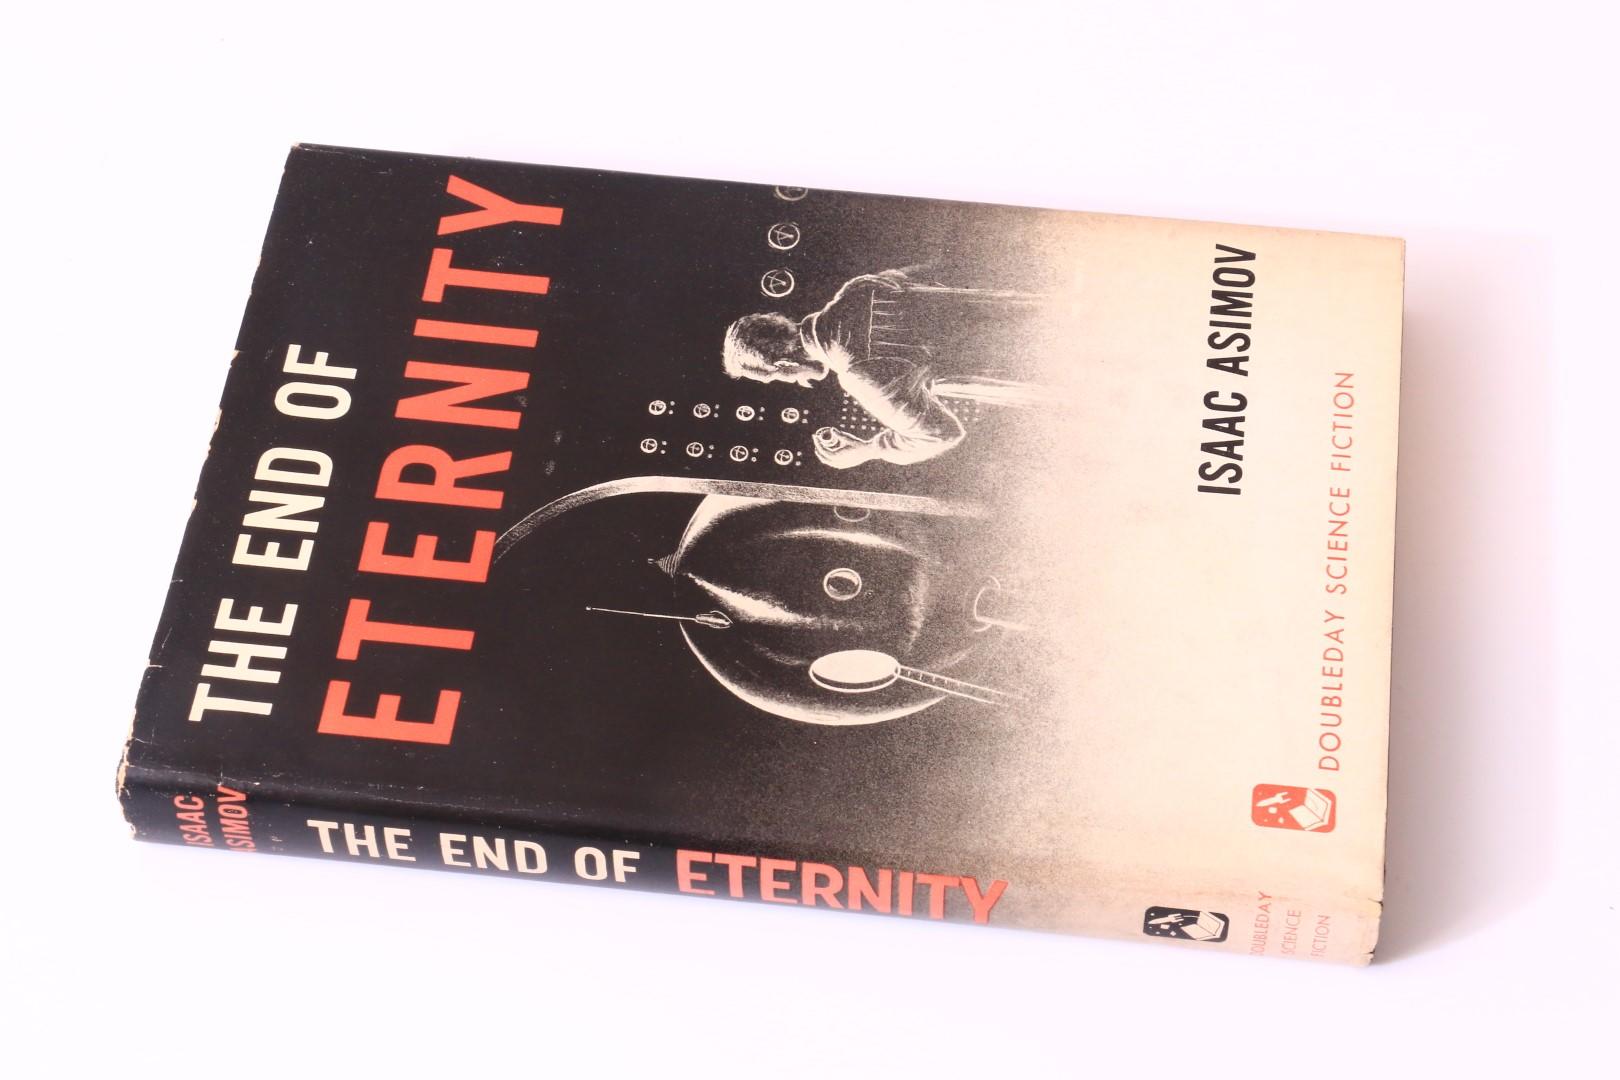 Isaac Asimov - The End of Eternity - Doubleday, 1955, First Edition.